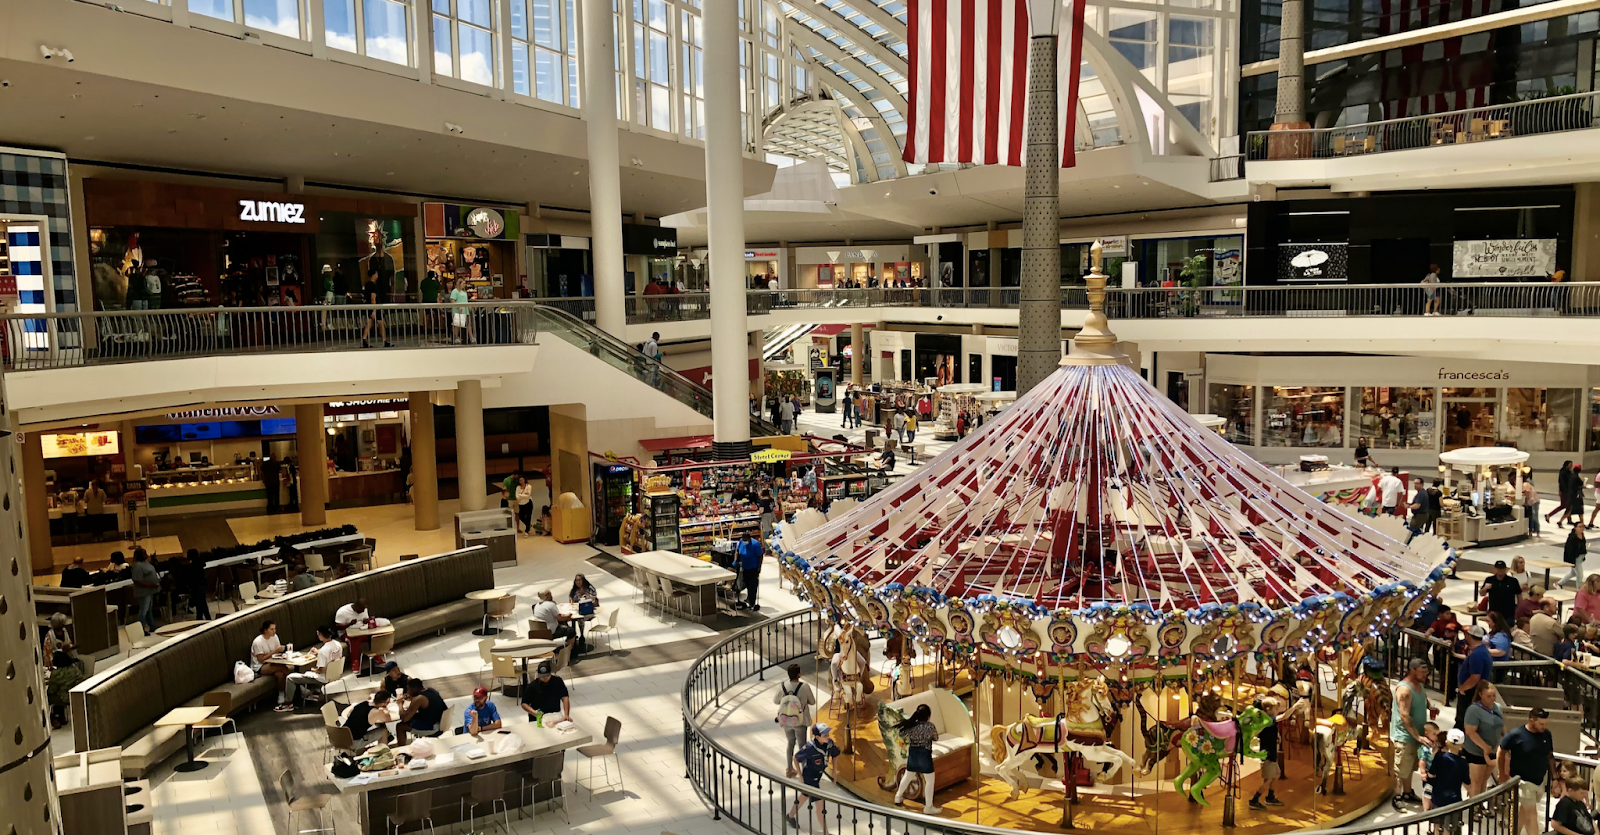 In addition to its many restaurants and shops, the food hall also features a carousel that is a big hit with the mall's younger customers. There is also free WiFi, a place to charge your phone, strollers to rent, a quiet area to sit, security guards to make sure everyone is okay, and more.